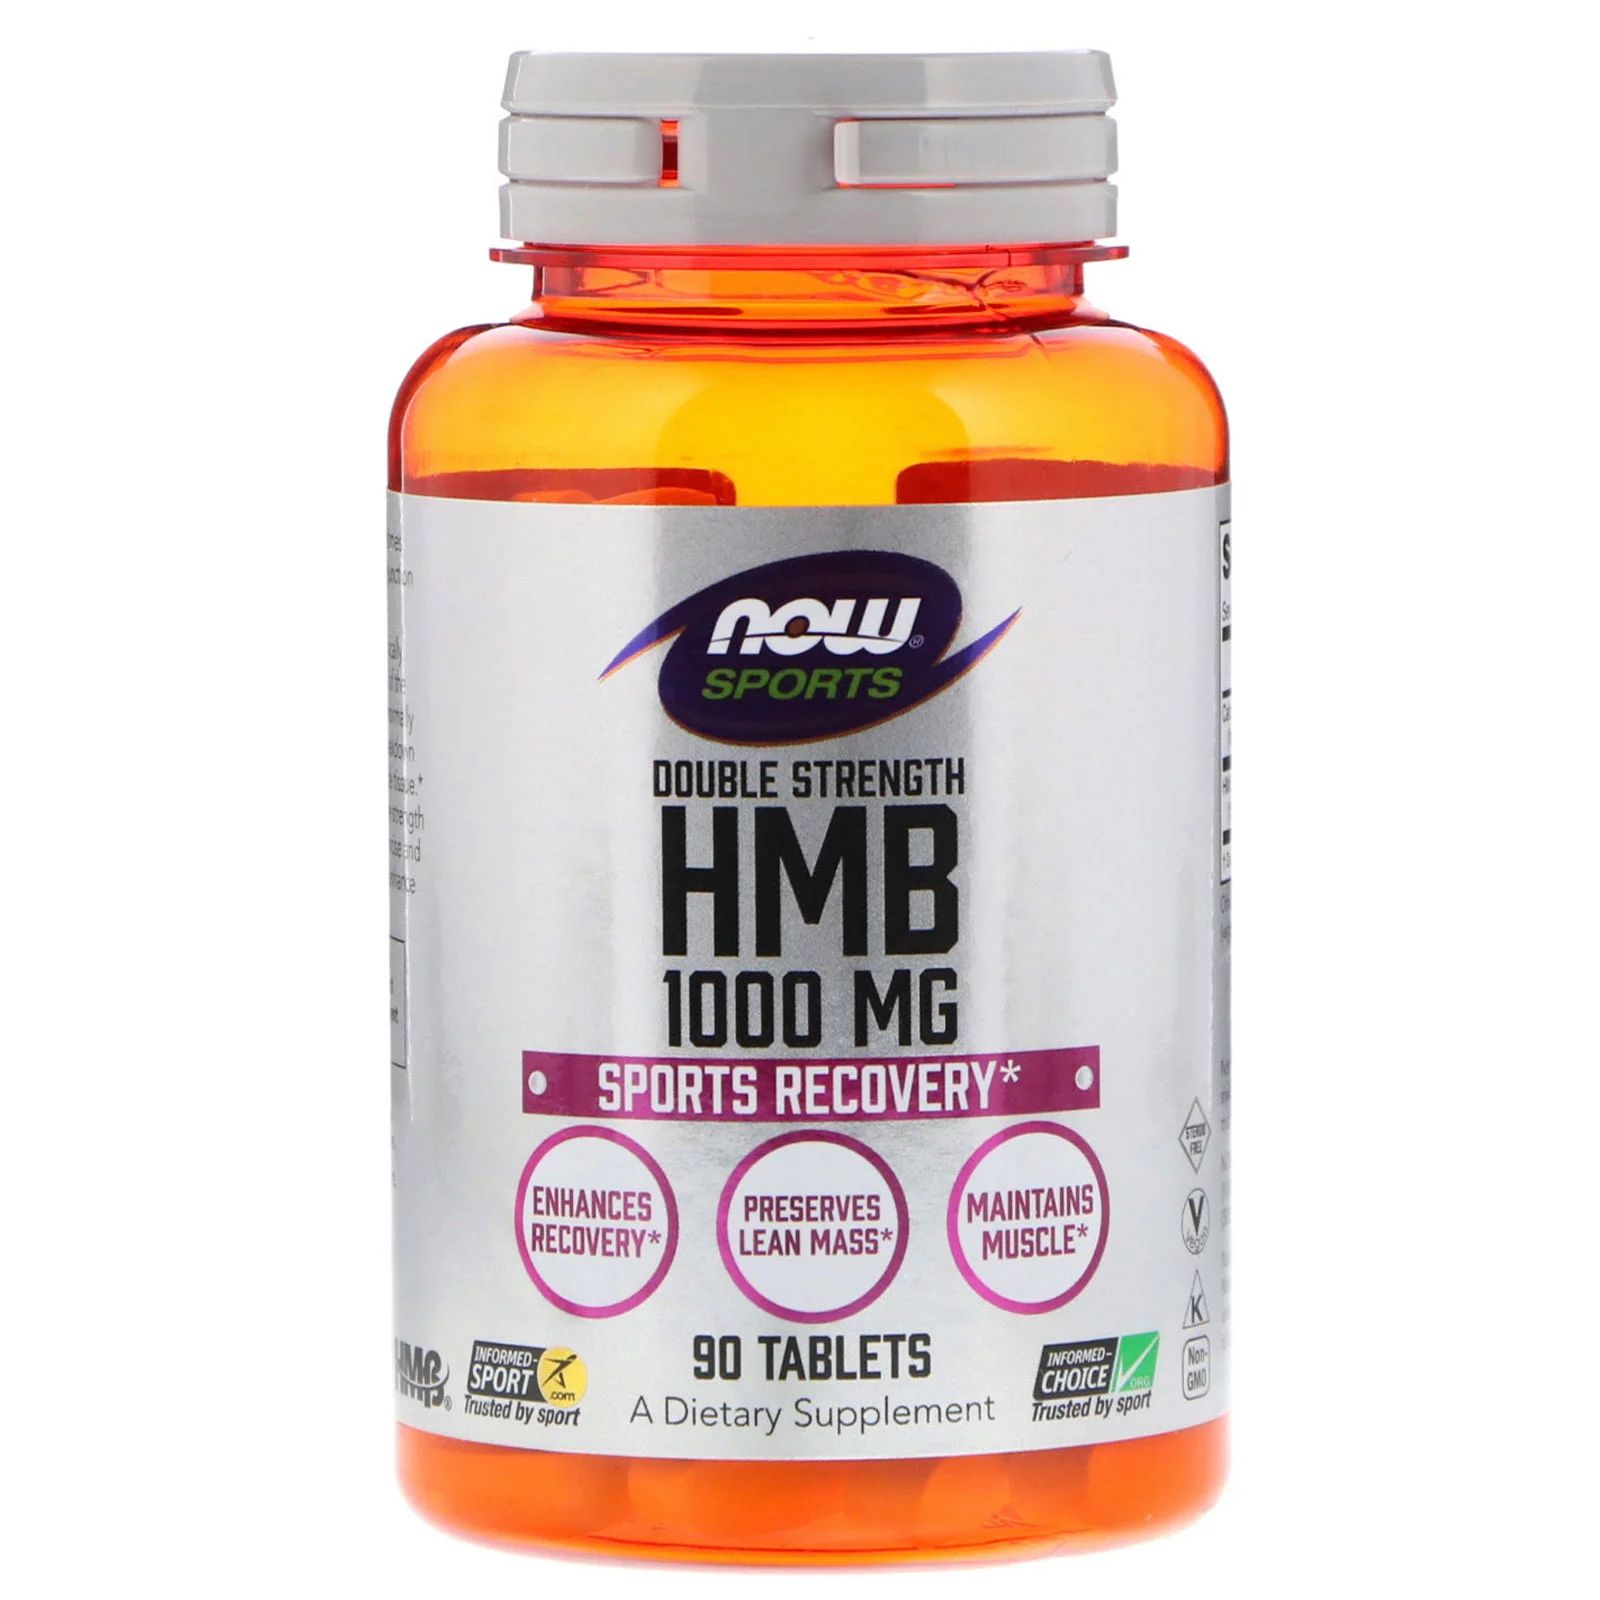 Now Foods HMB, 1000 mg, Double Strength, 1000 mg, 90 tablet